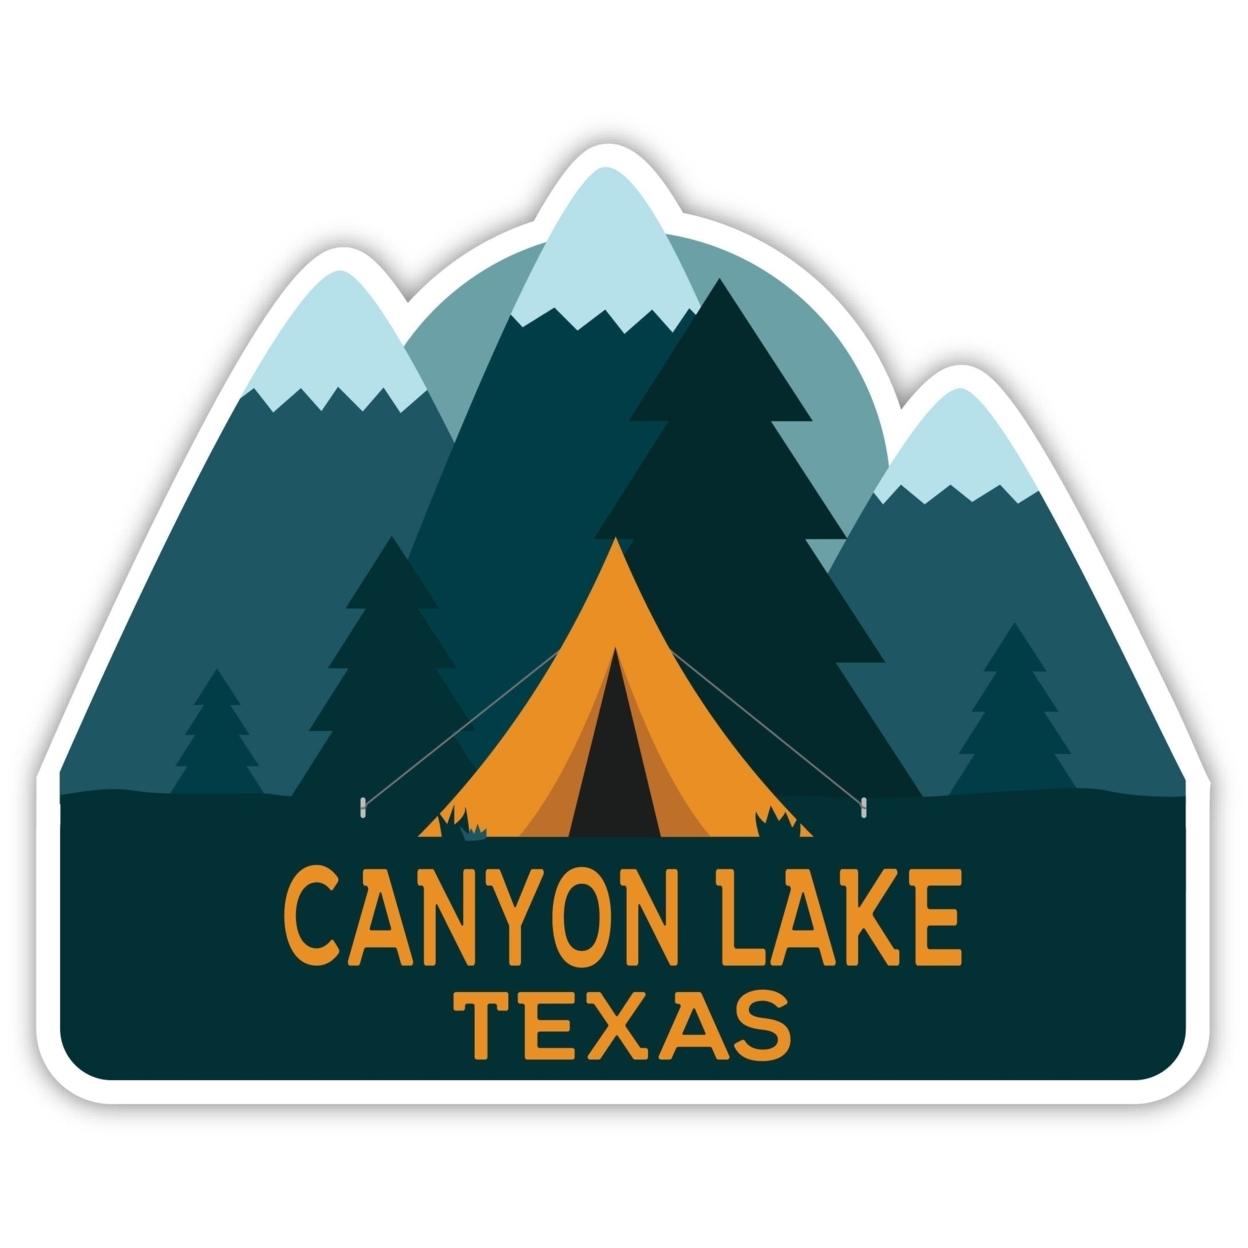 Canyon Lake Texas Souvenir Decorative Stickers (Choose Theme And Size) - 4-Pack, 10-Inch, Tent